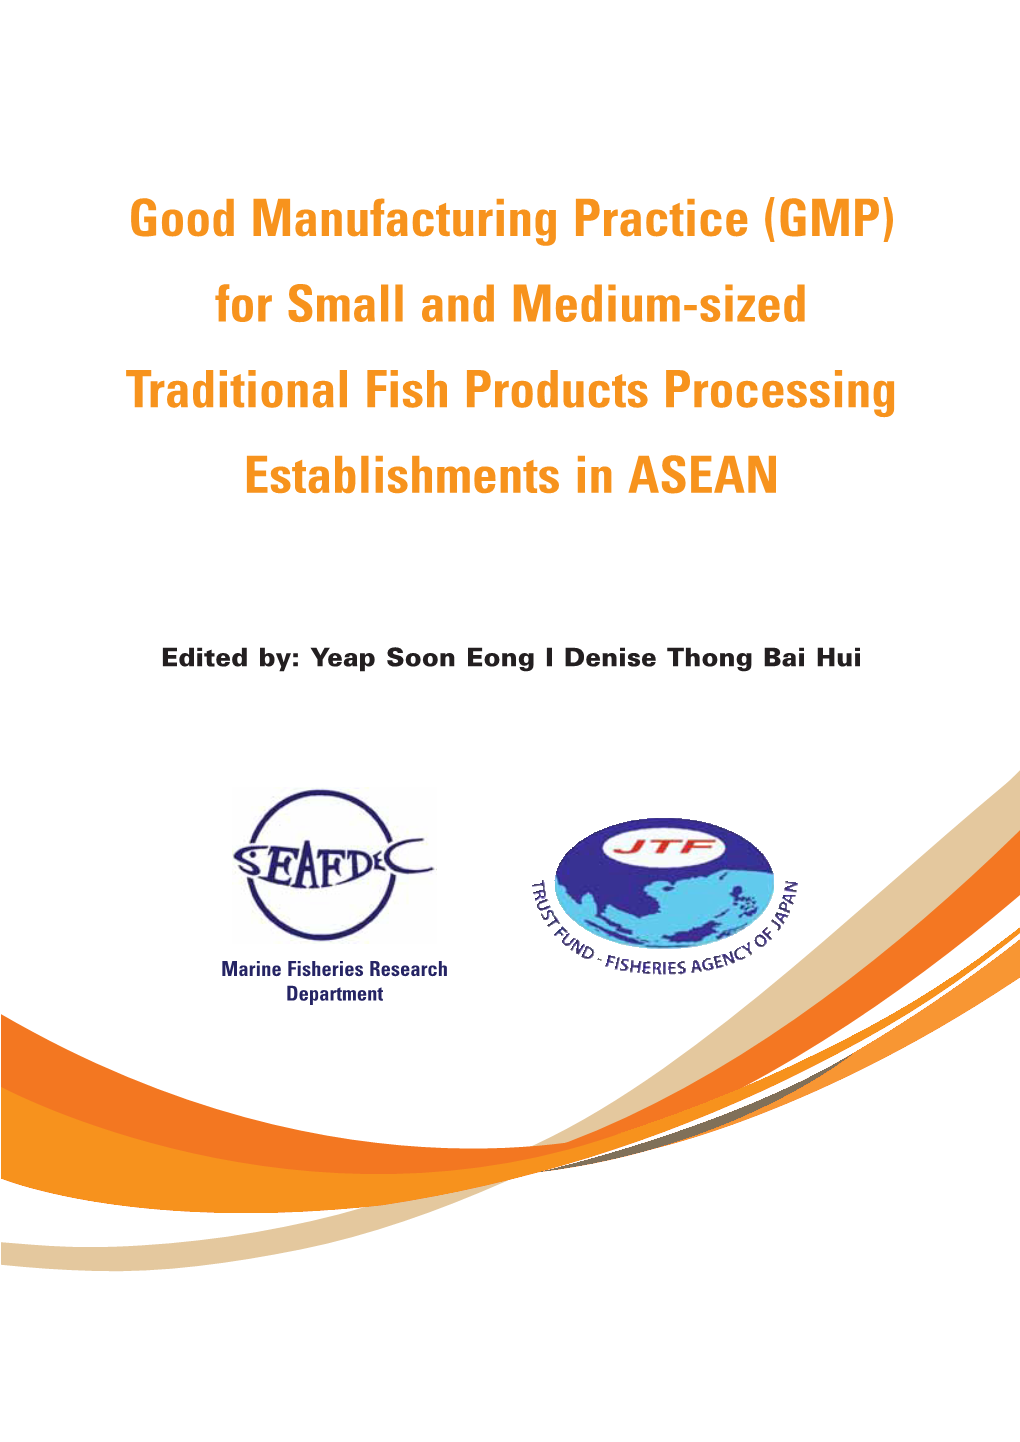 Good Manufacturing Practice (GMP) for Small and Medium-Sized Traditional Fish Products Processing Establishments in ASEAN